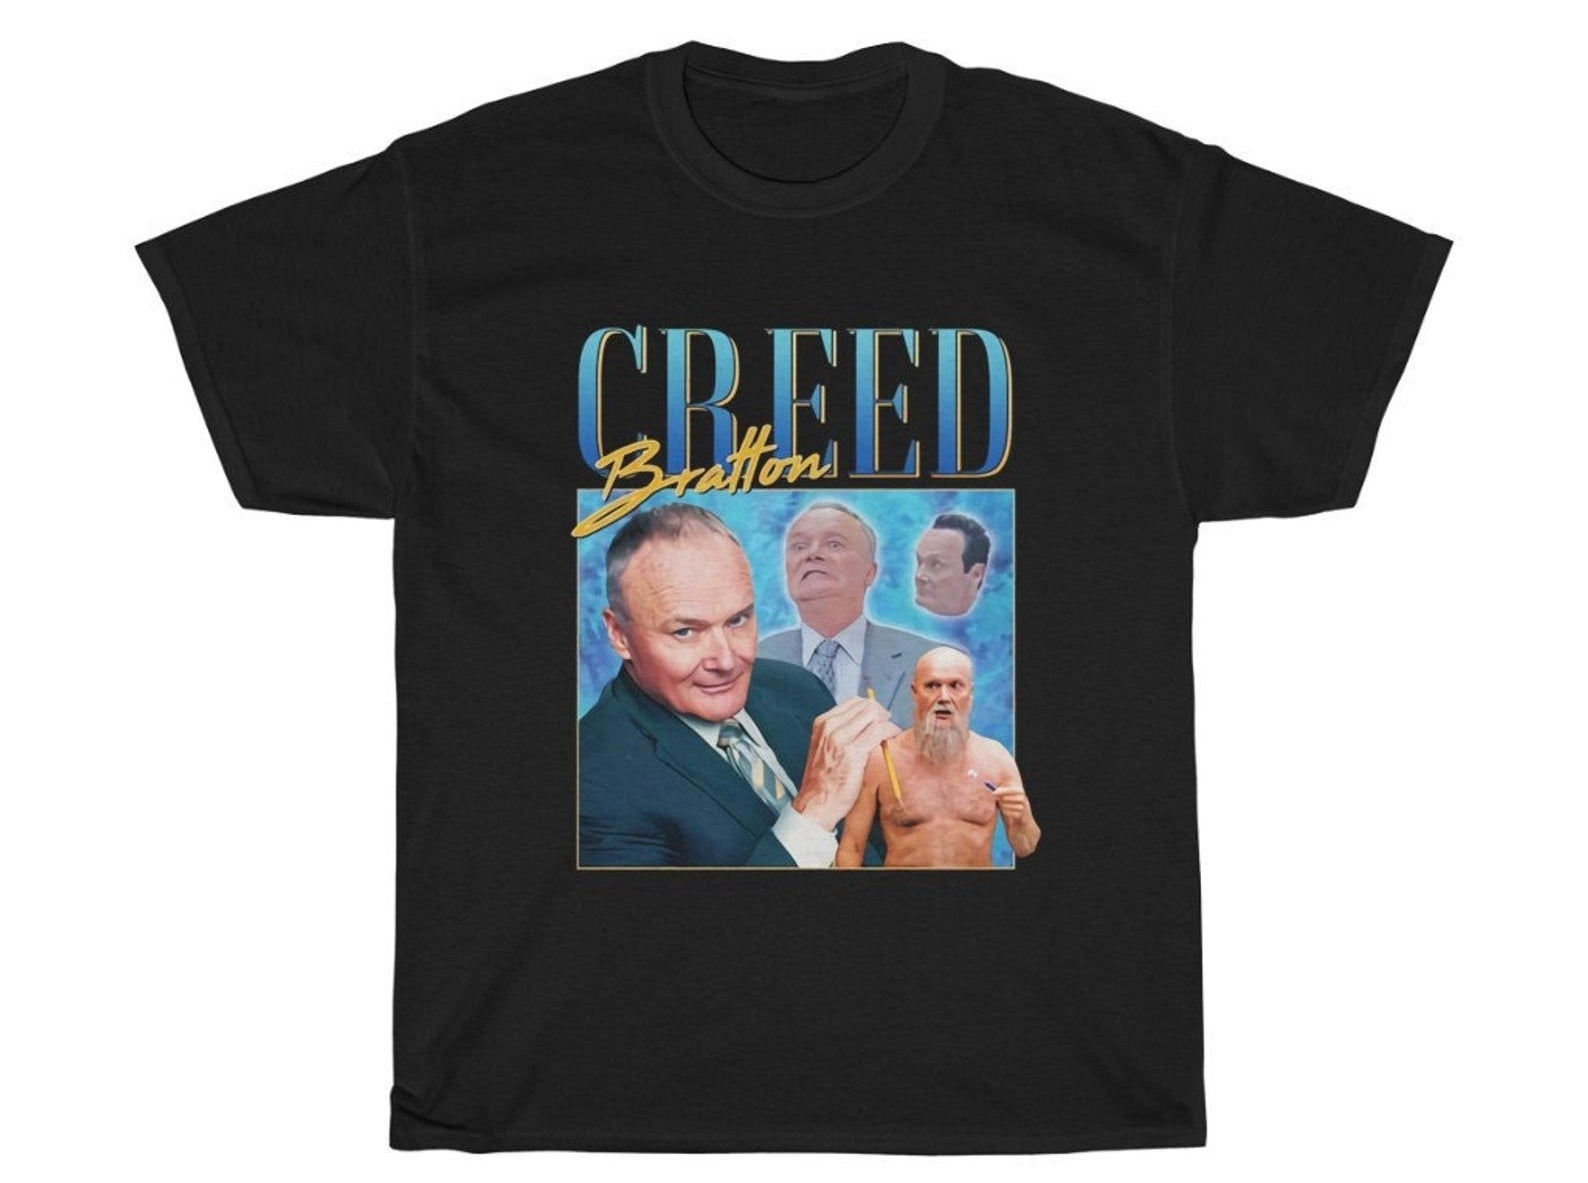 shirt that says &quot;Creed Bratton&quot; with different Creed faces